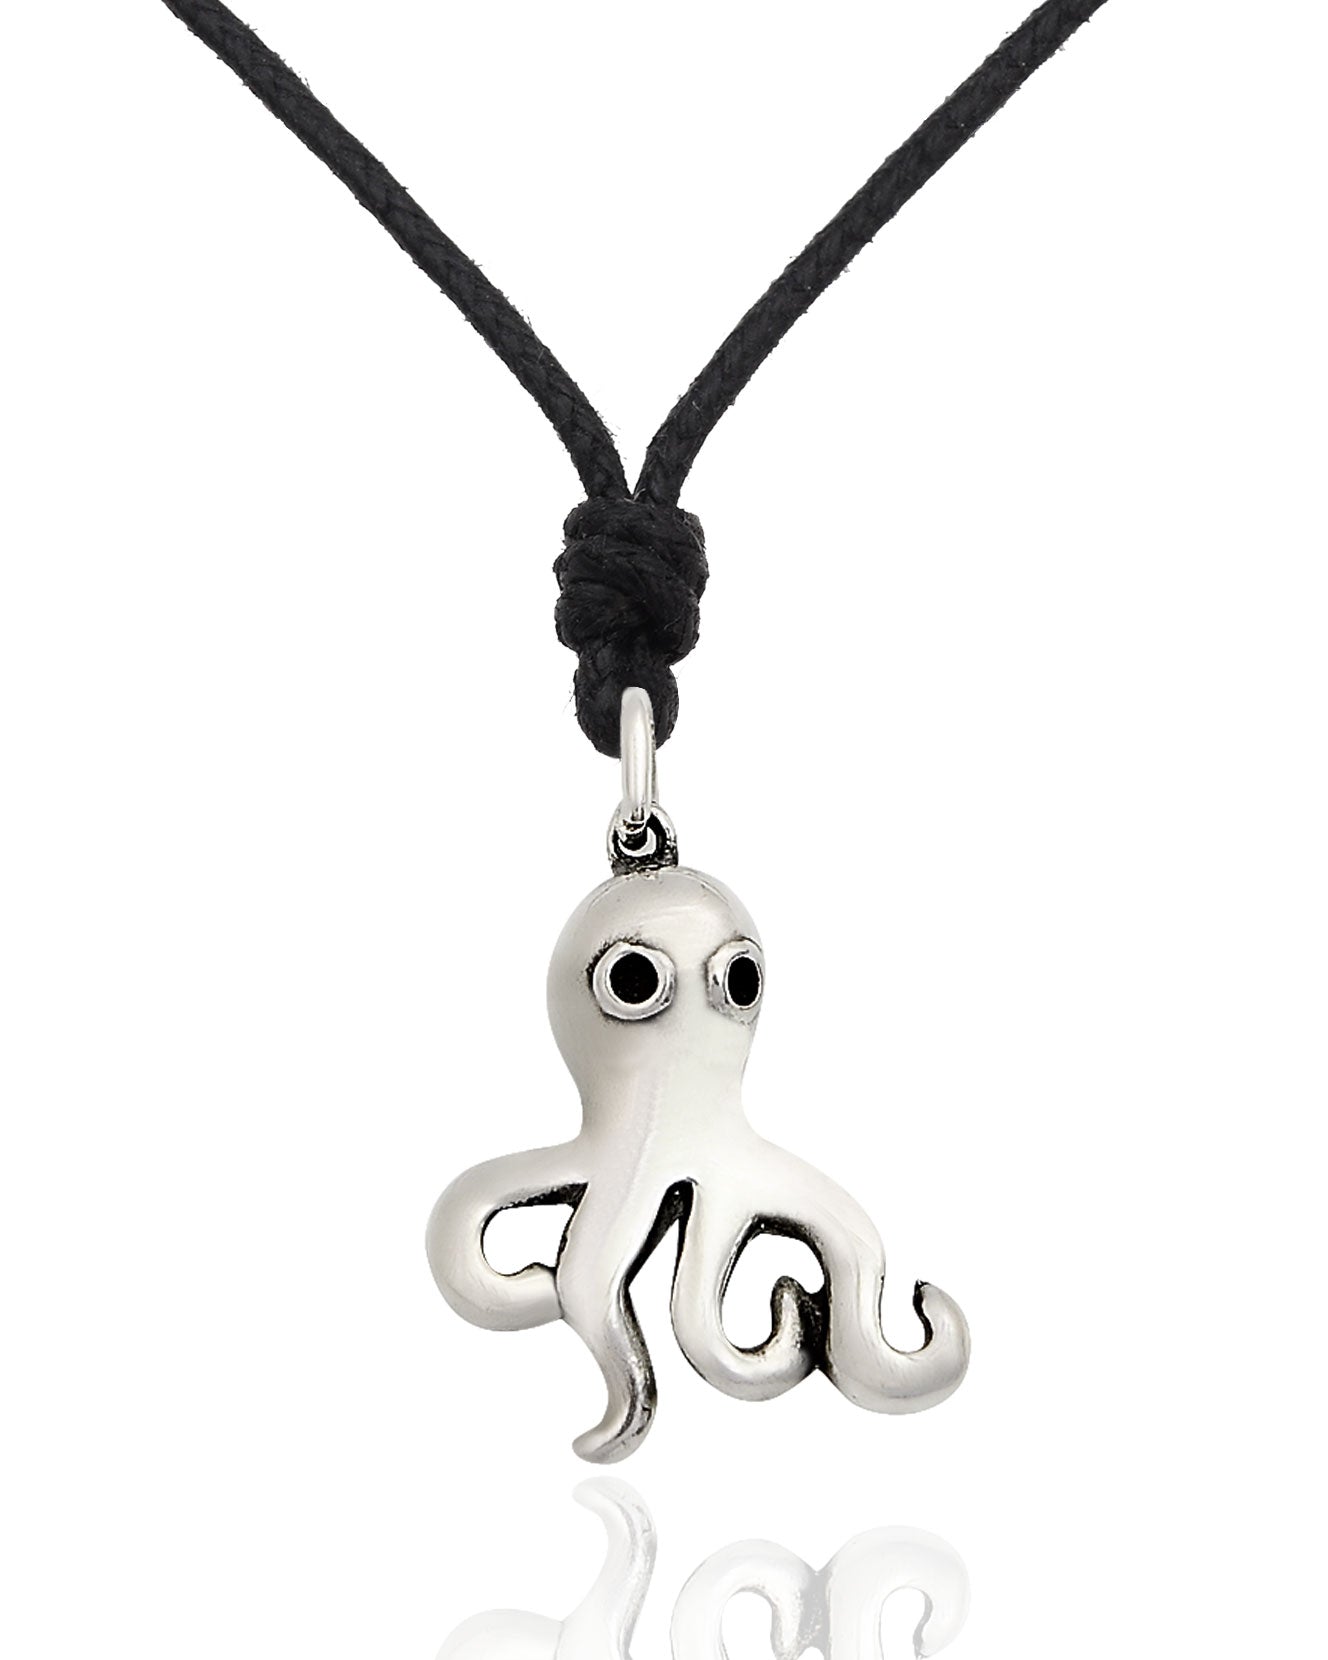 New Octopus Silver Pewter Charm Necklace Pendant Jewelry